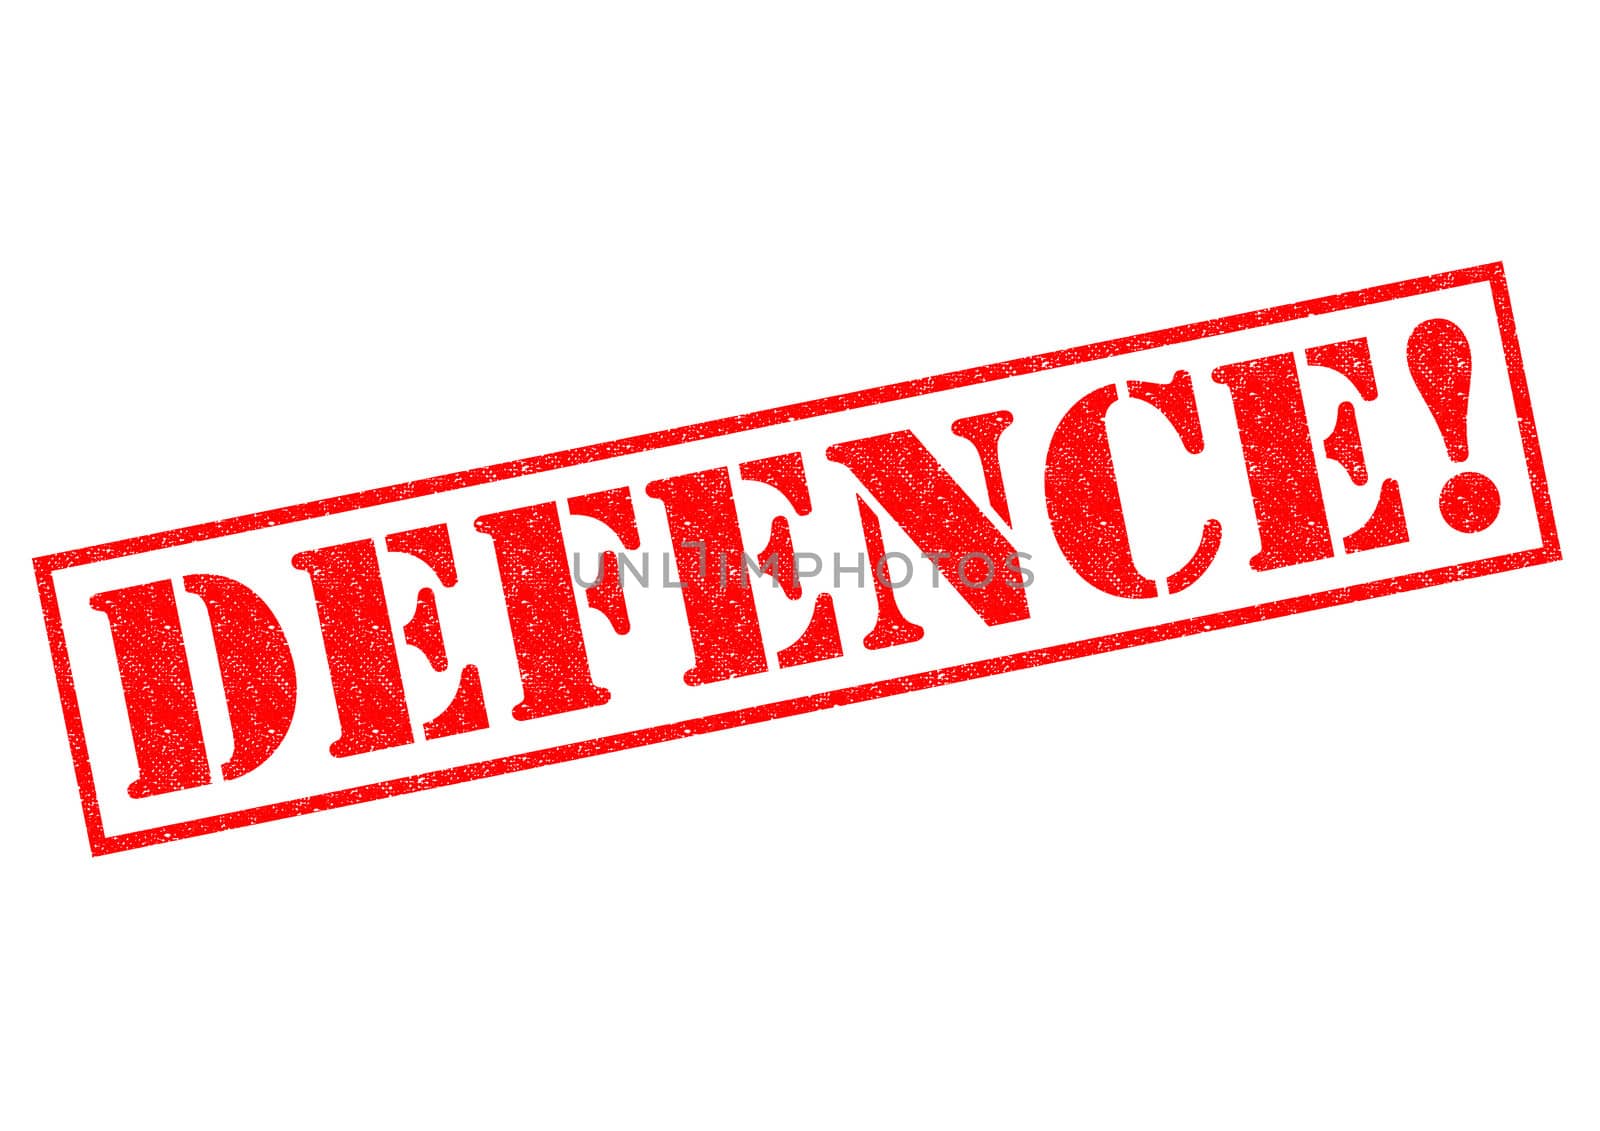 DEFENCE! red Rubber Stamp over a white background.